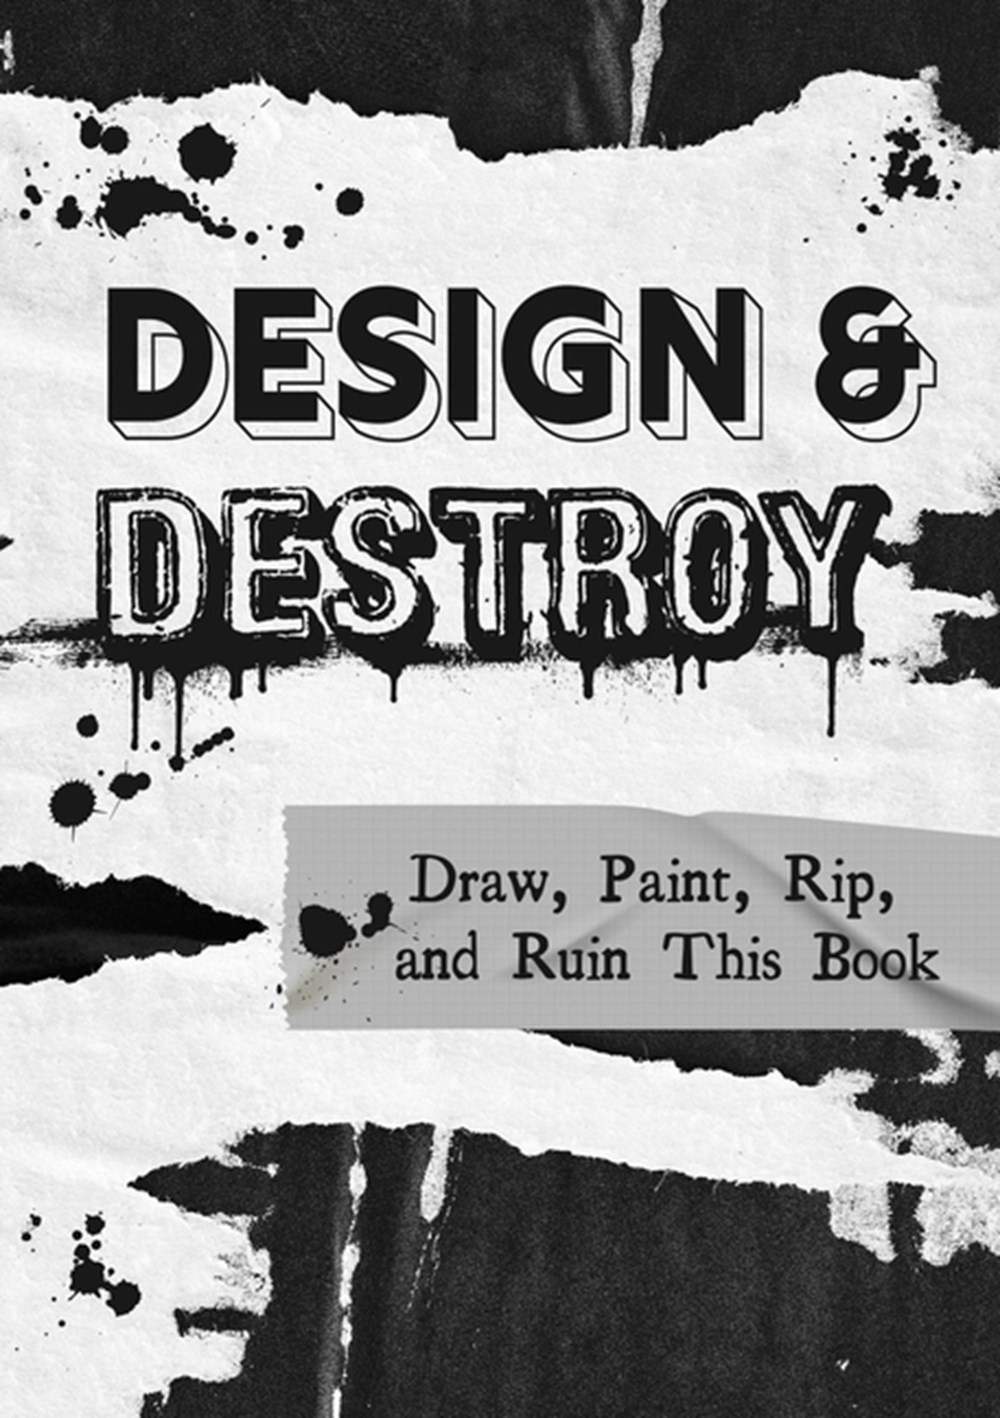 Design & Destroy Draw, Paint, Rip, and Ruin This Book